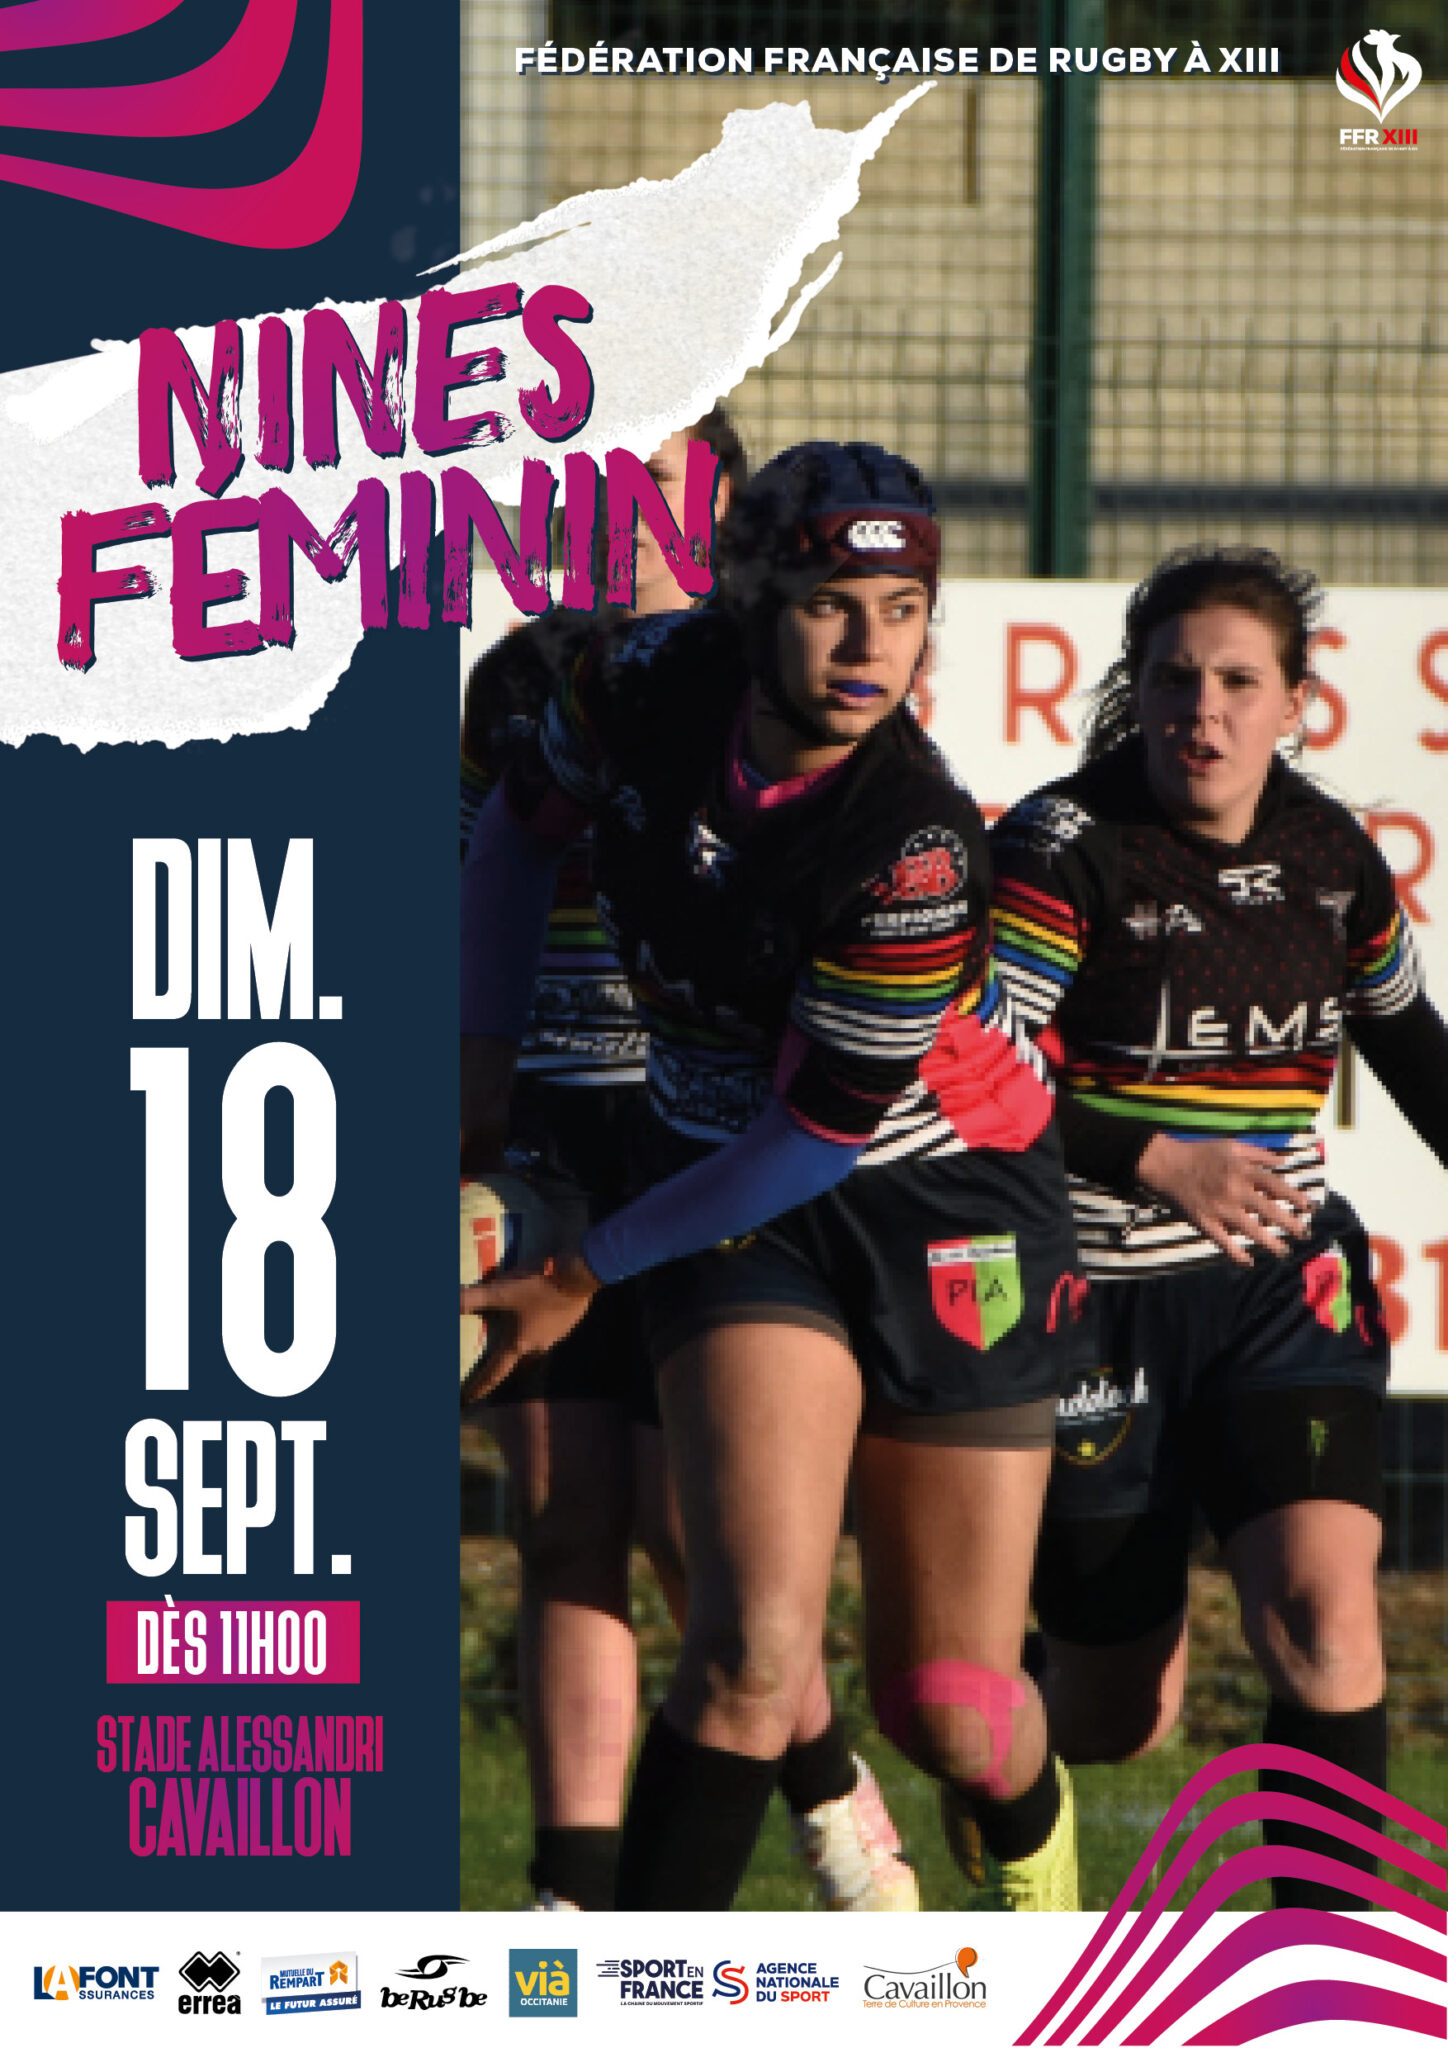 France Women’s Nines to be held in Cavaillon tomorrow